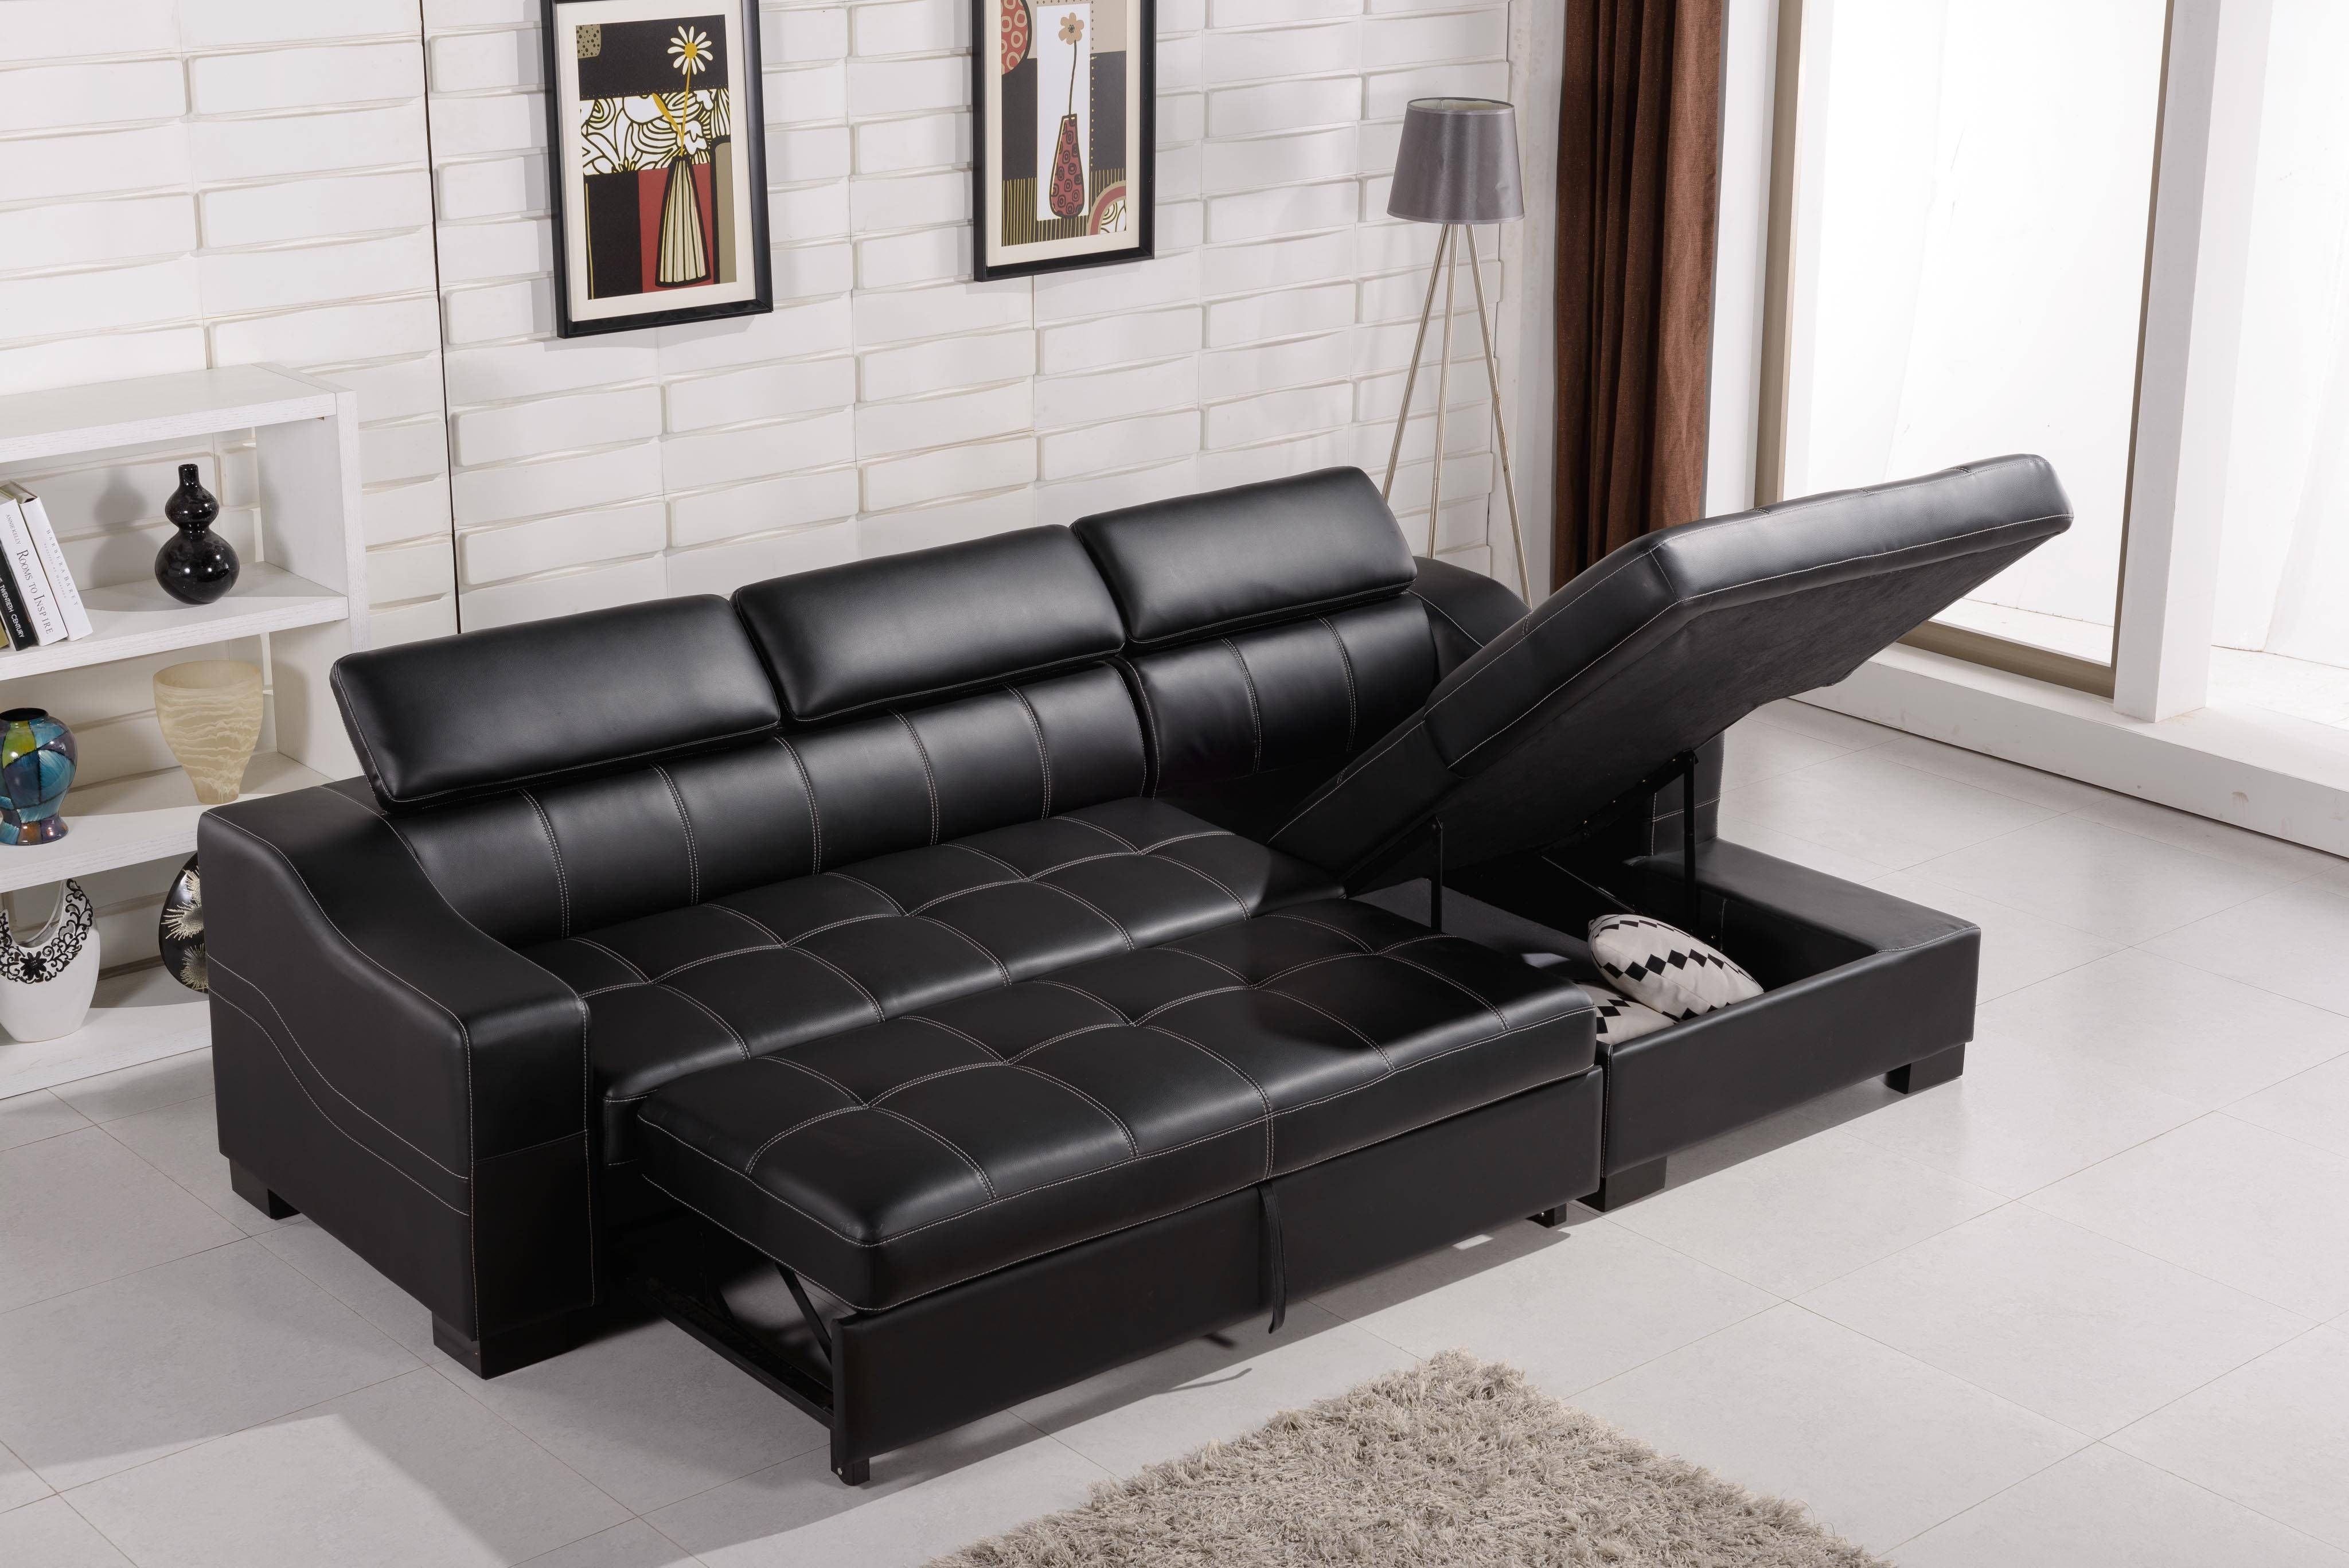 Sofas Center : Leather Sectional Sleeper Sofa With Chaise Cymun With Regard To Black Leather Sectional Sleeper Sofas (View 8 of 30)